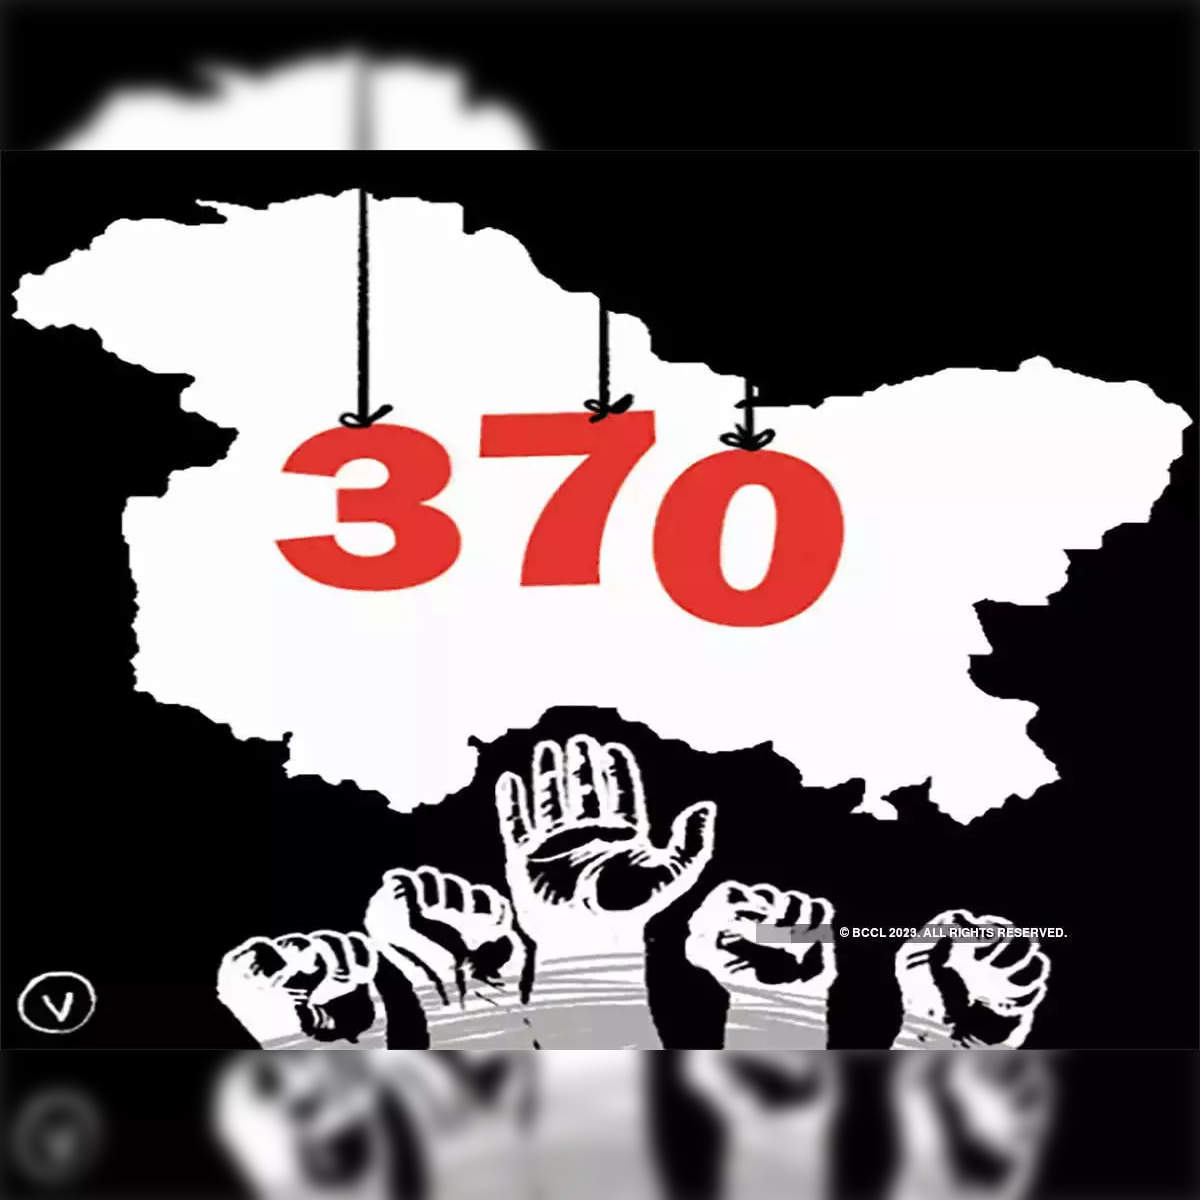 Article 370: A hark back to the past to find why Article 370 was considered permanent - The Economic Times